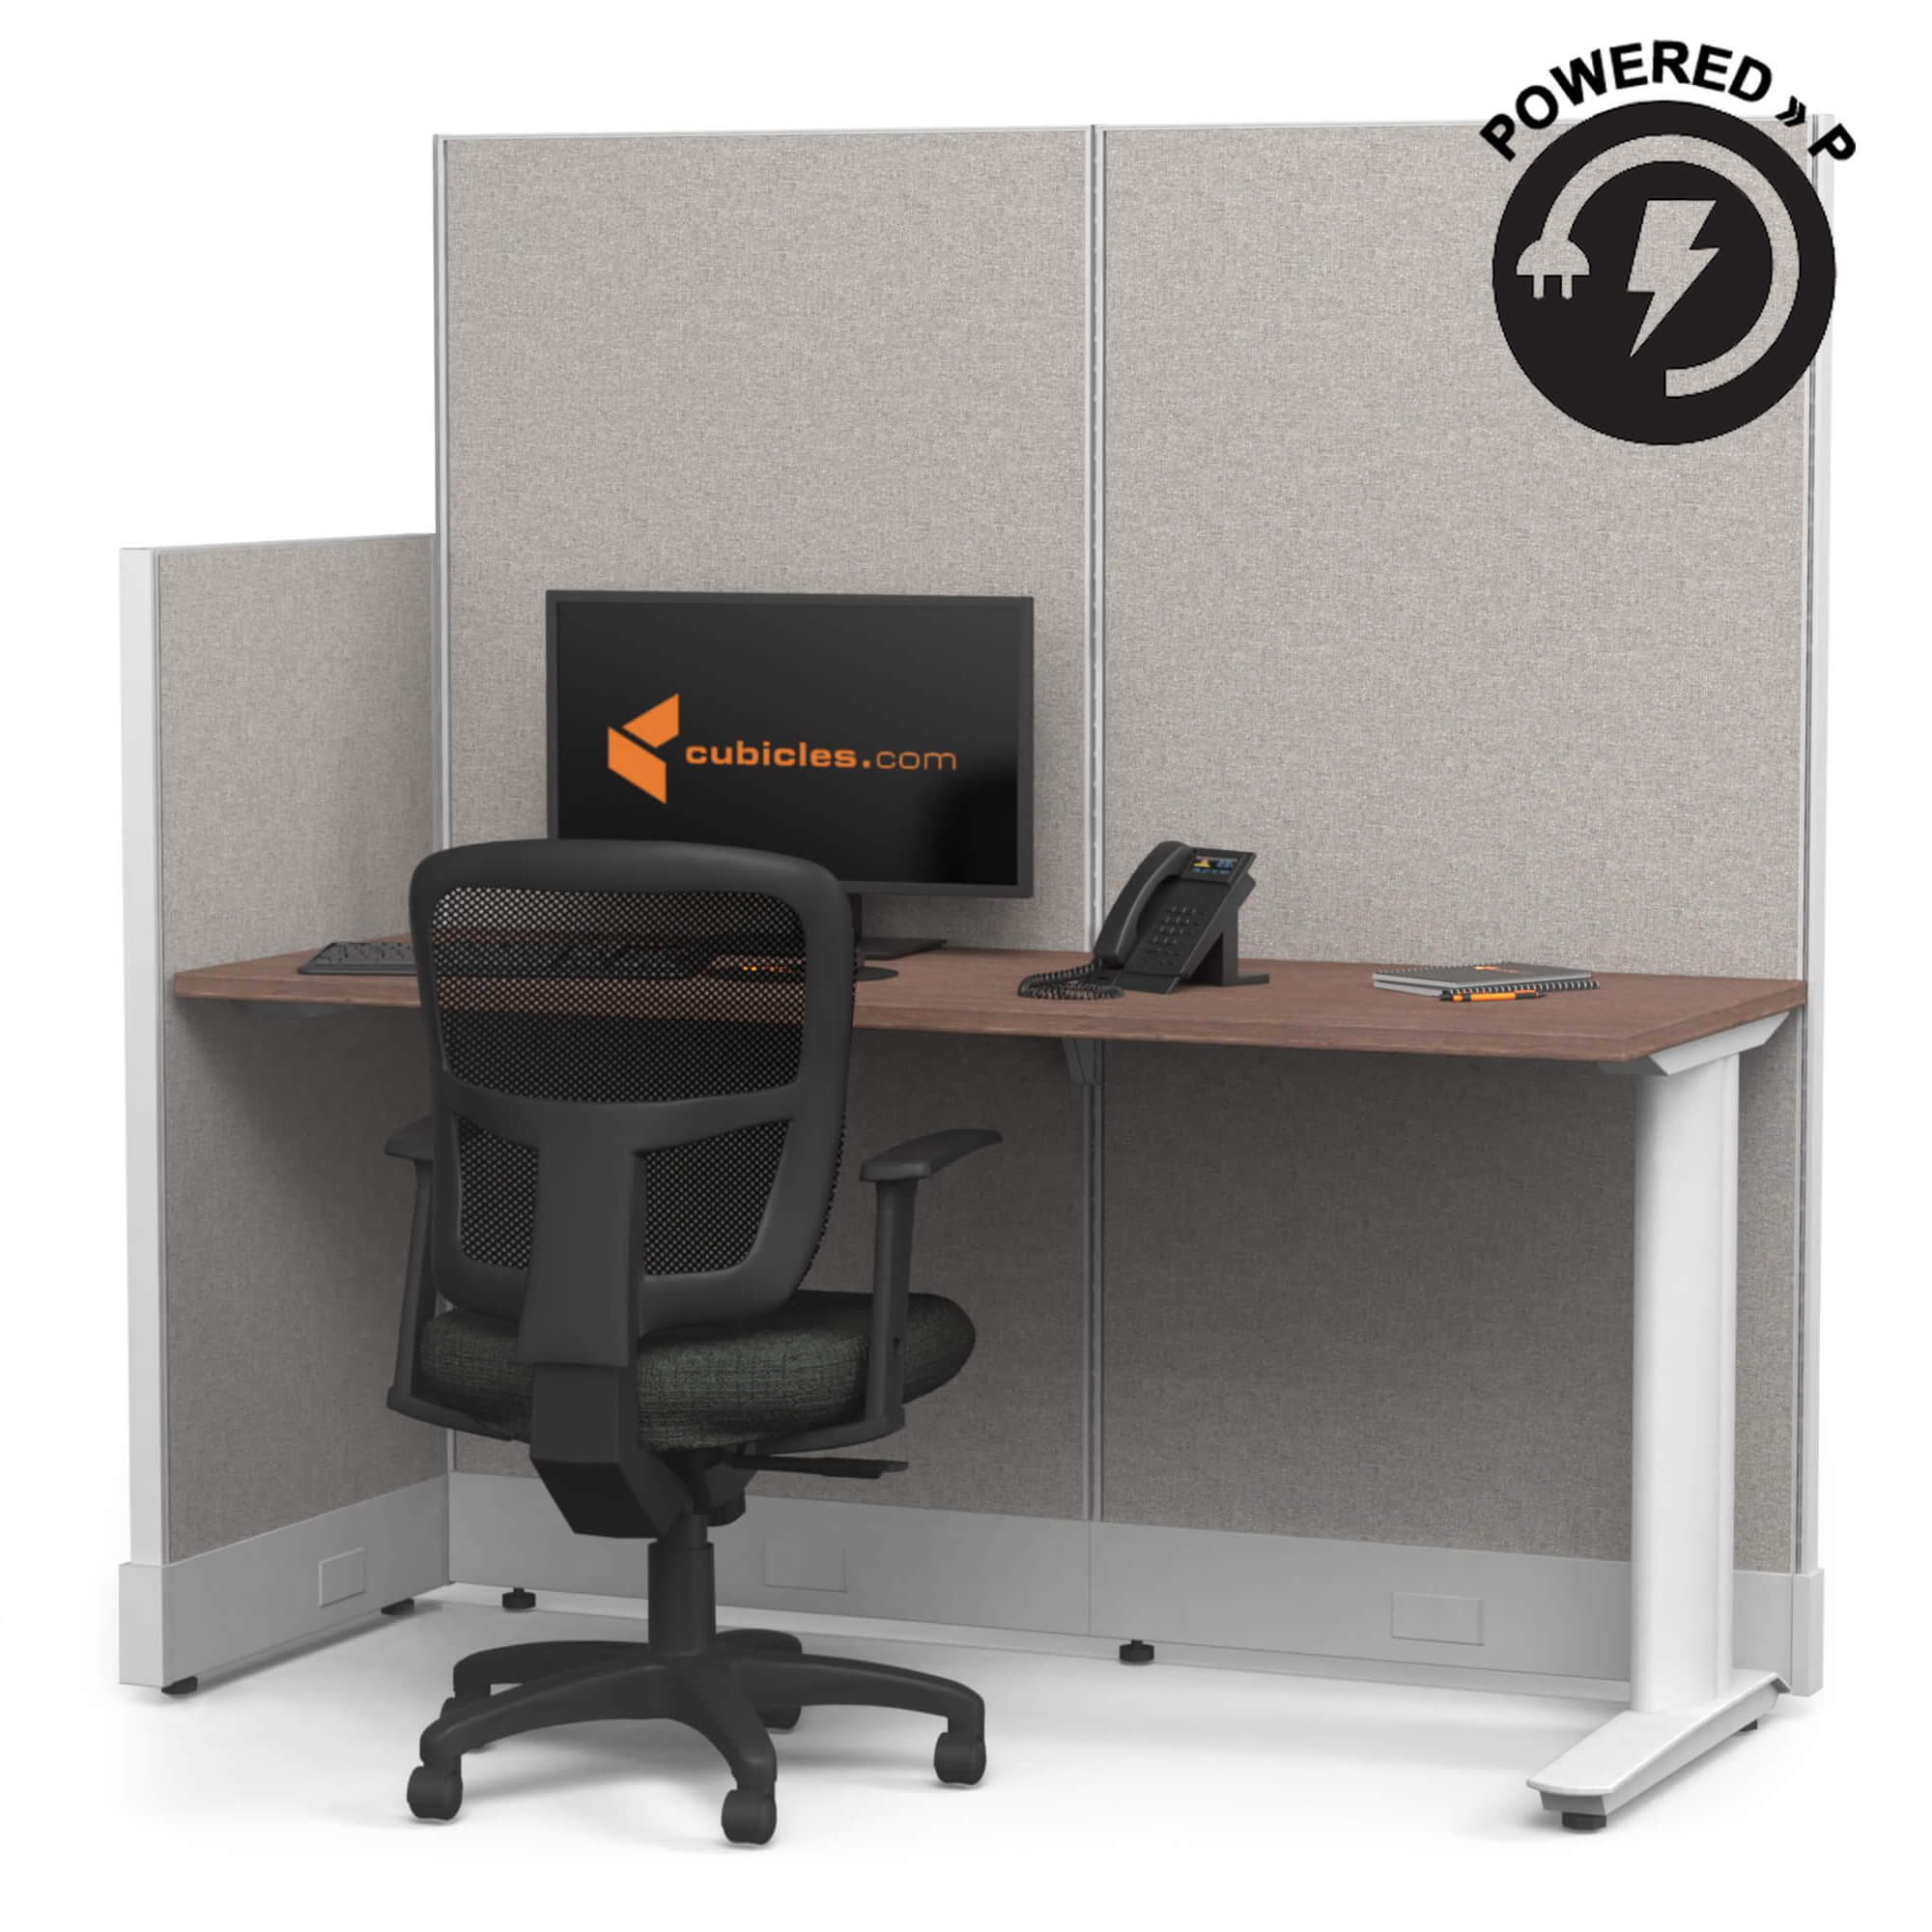 Cubicle desk straight 1pack powered sign